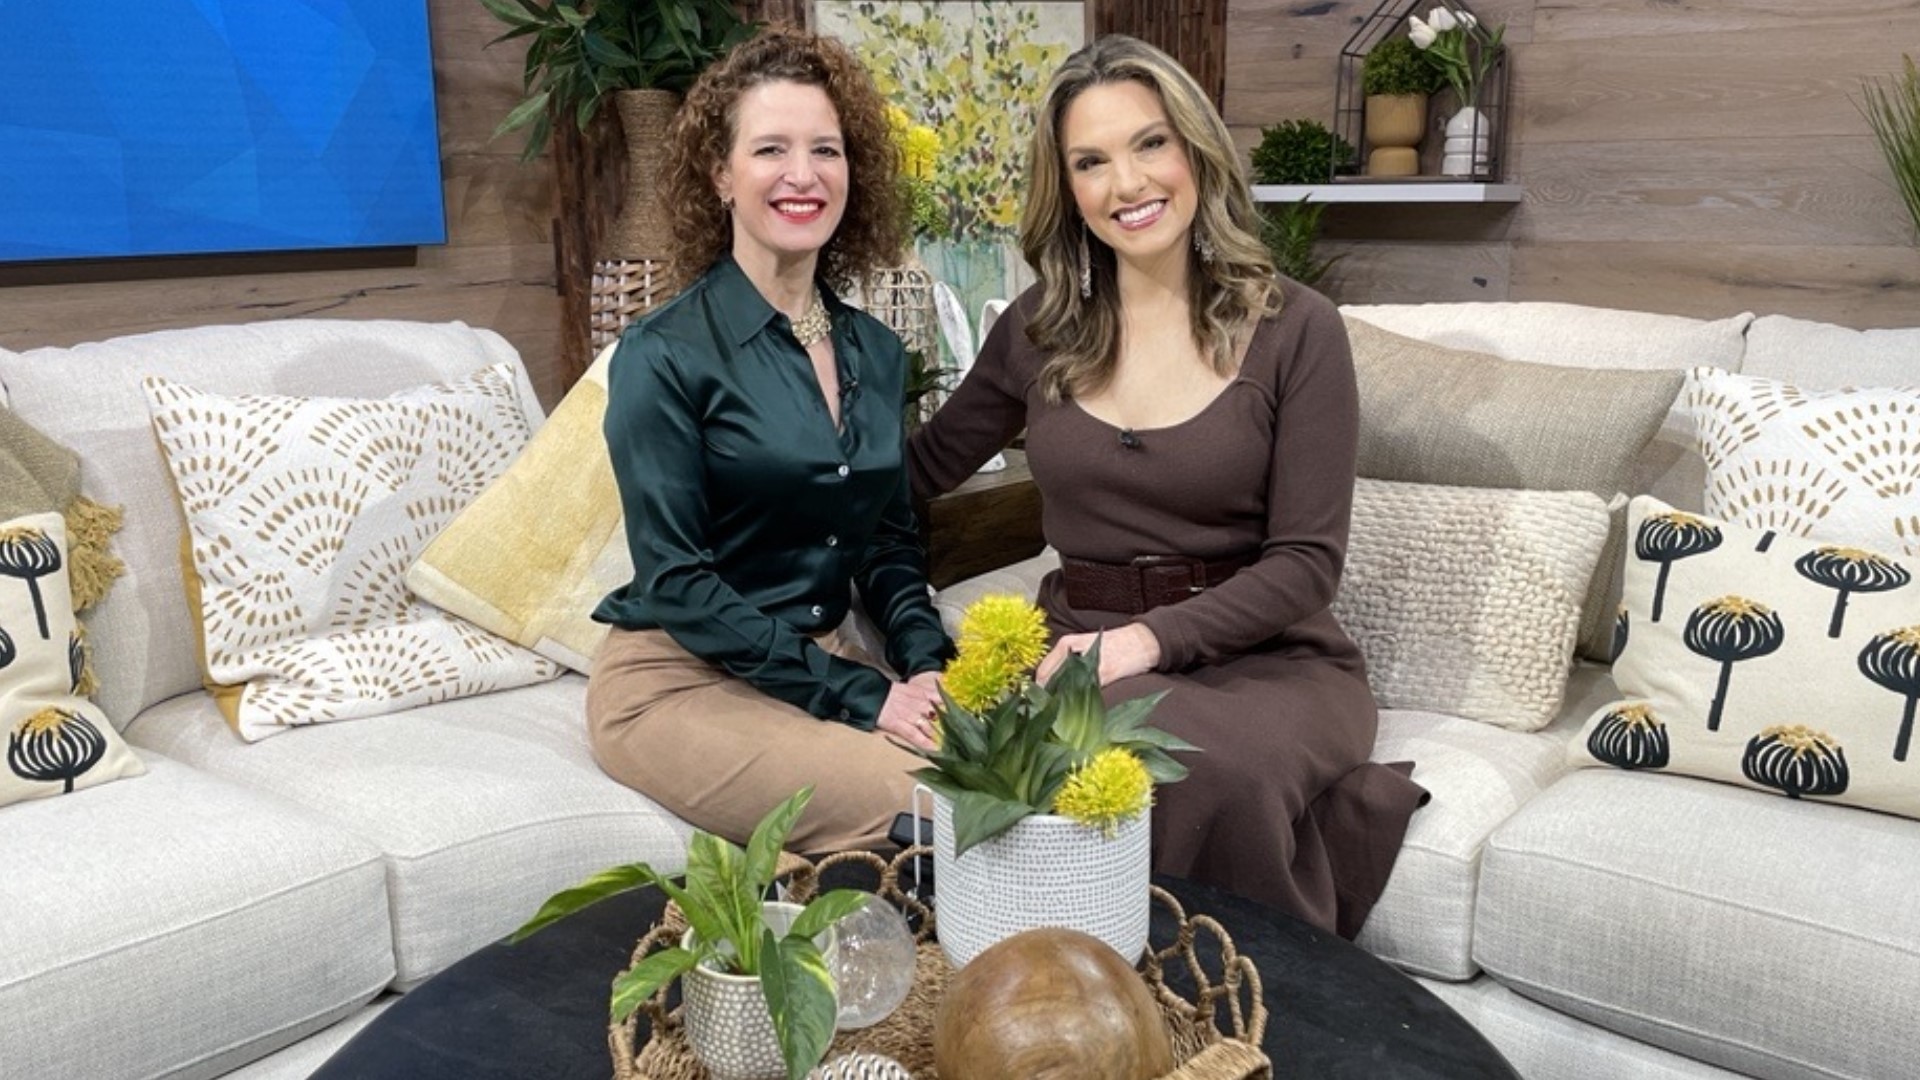 RejuvenationMD is opening their first Seattle area location in Bothell and Dr. Tianna Tsitsis joined the show to share more. Sponsored by RejuvenationMD.